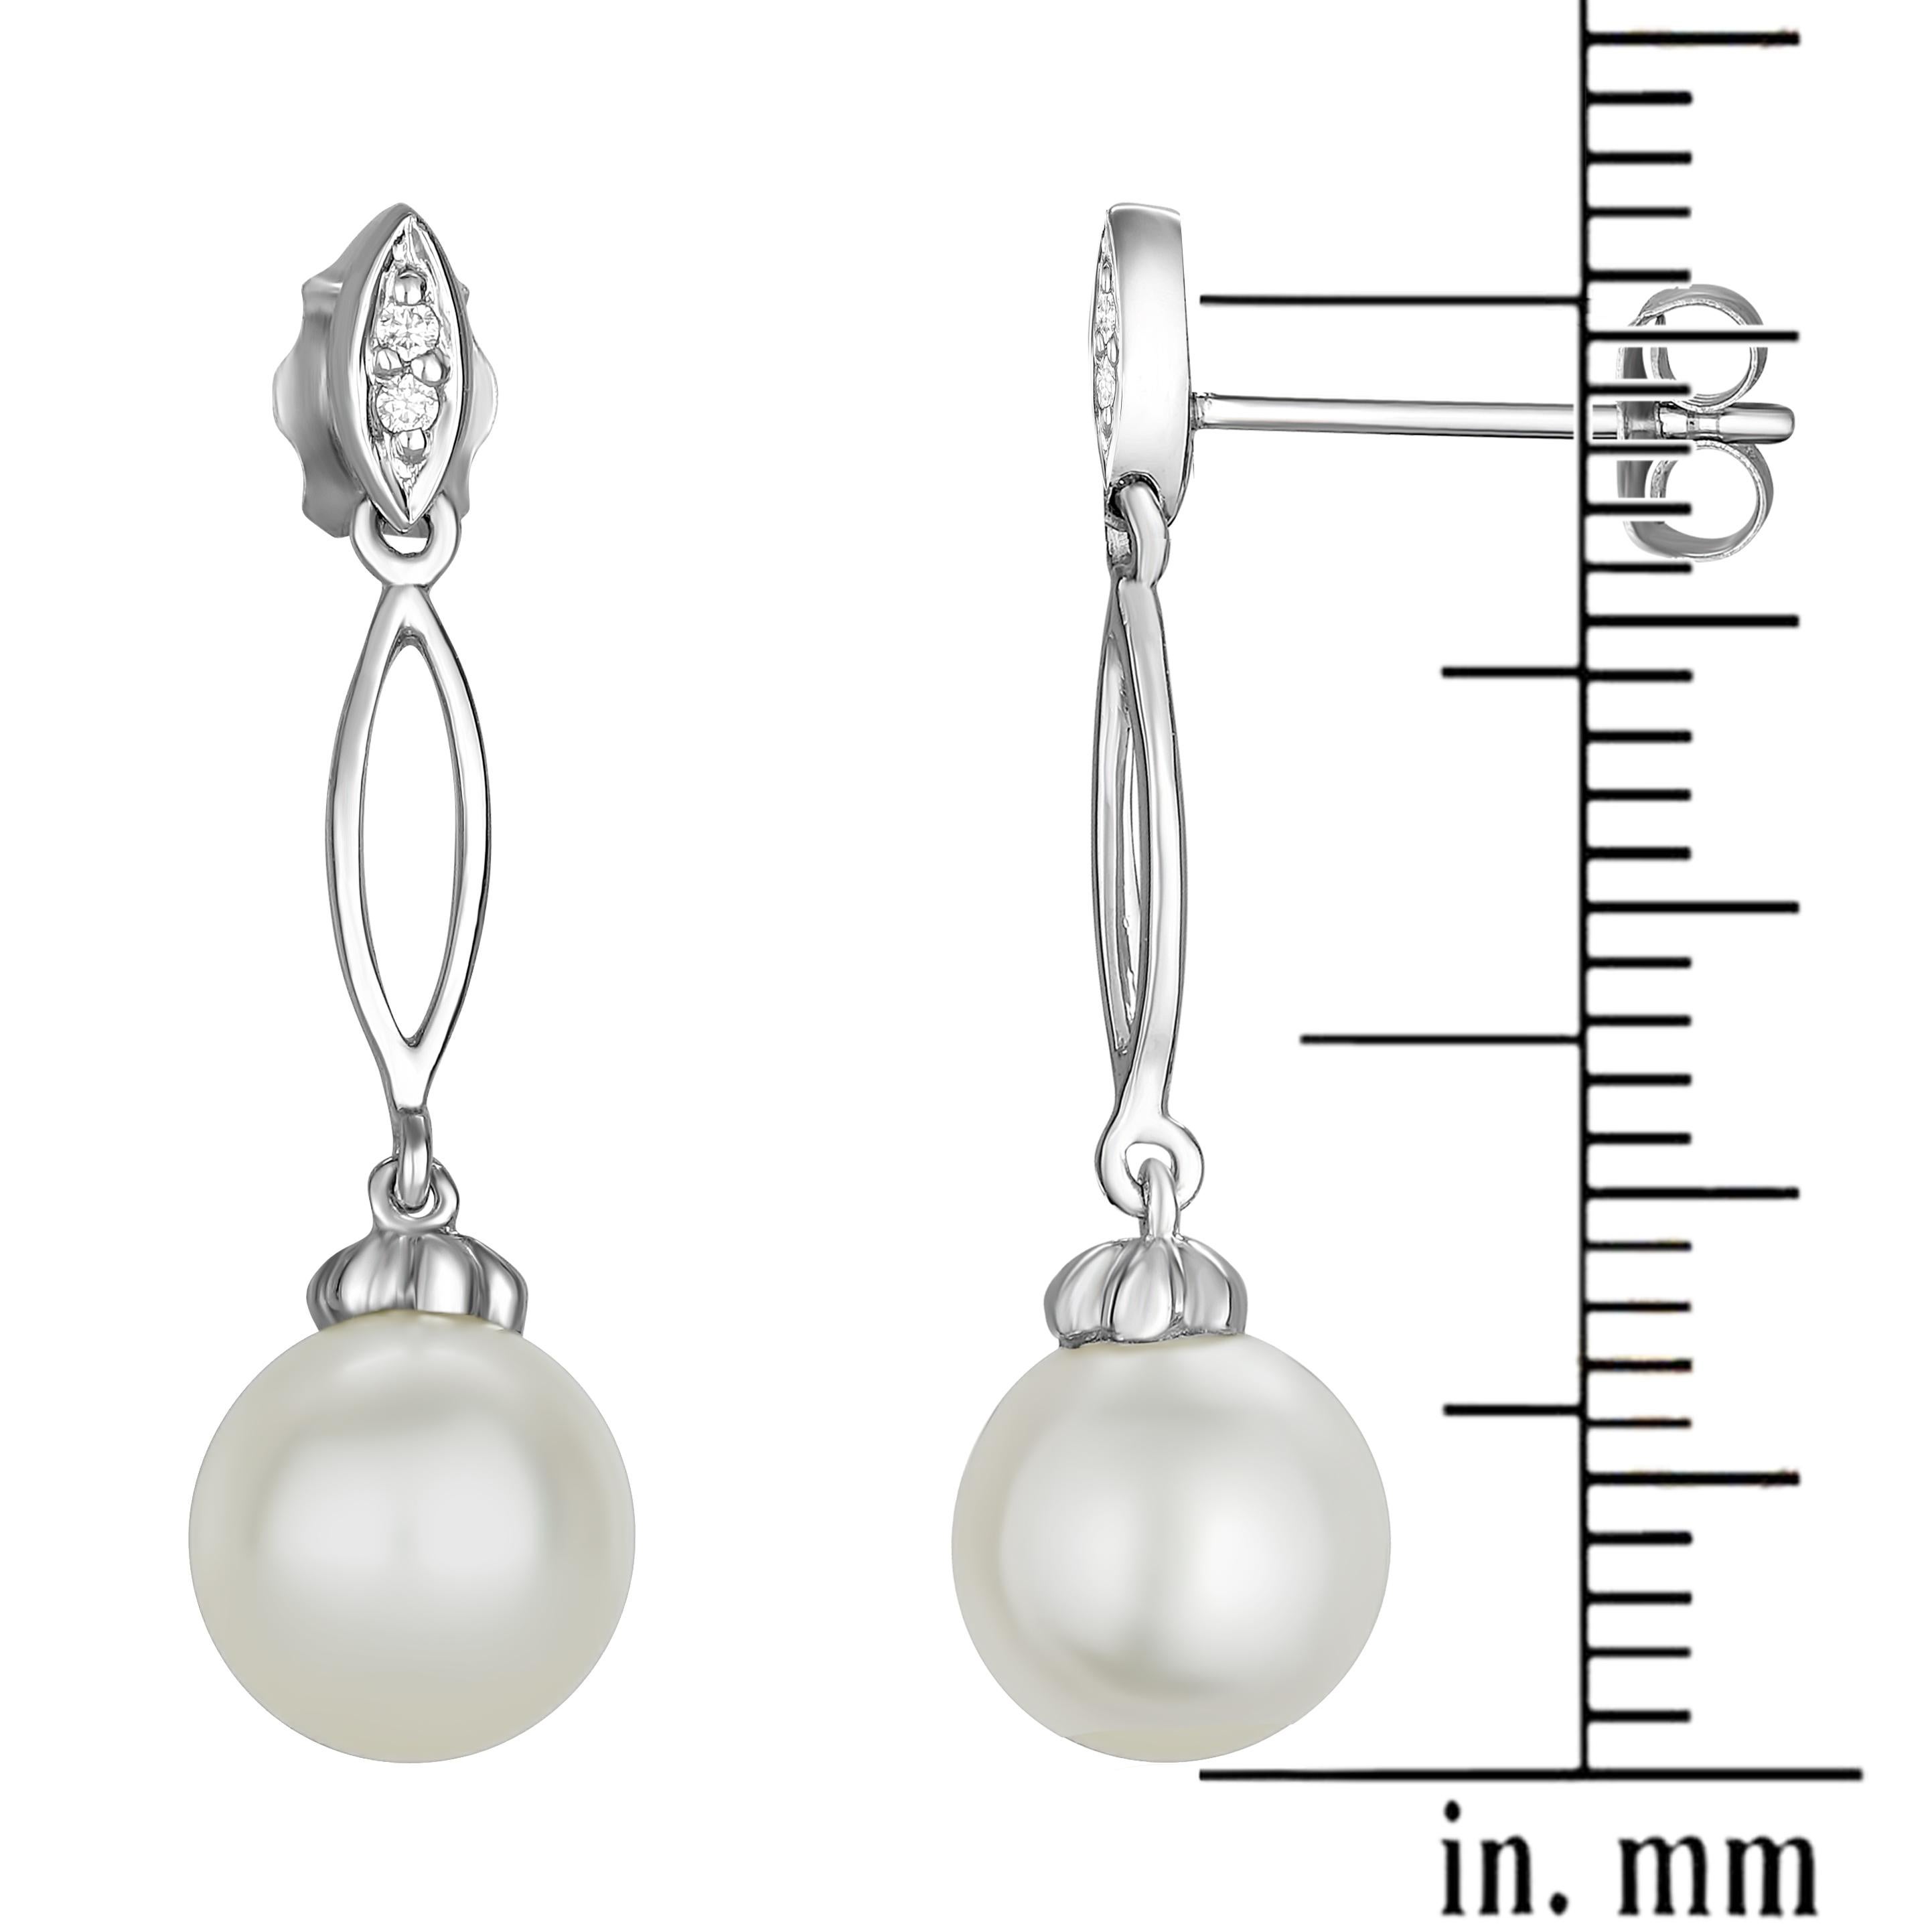 Add a touch of elegance to any ensemble when you add this pair of radiant pearl earrings to your look. The earrings feature two AAA quality white pearls handpicked for their gorgeous luster. The earrings are comprised ofof the finest 14K gold, and